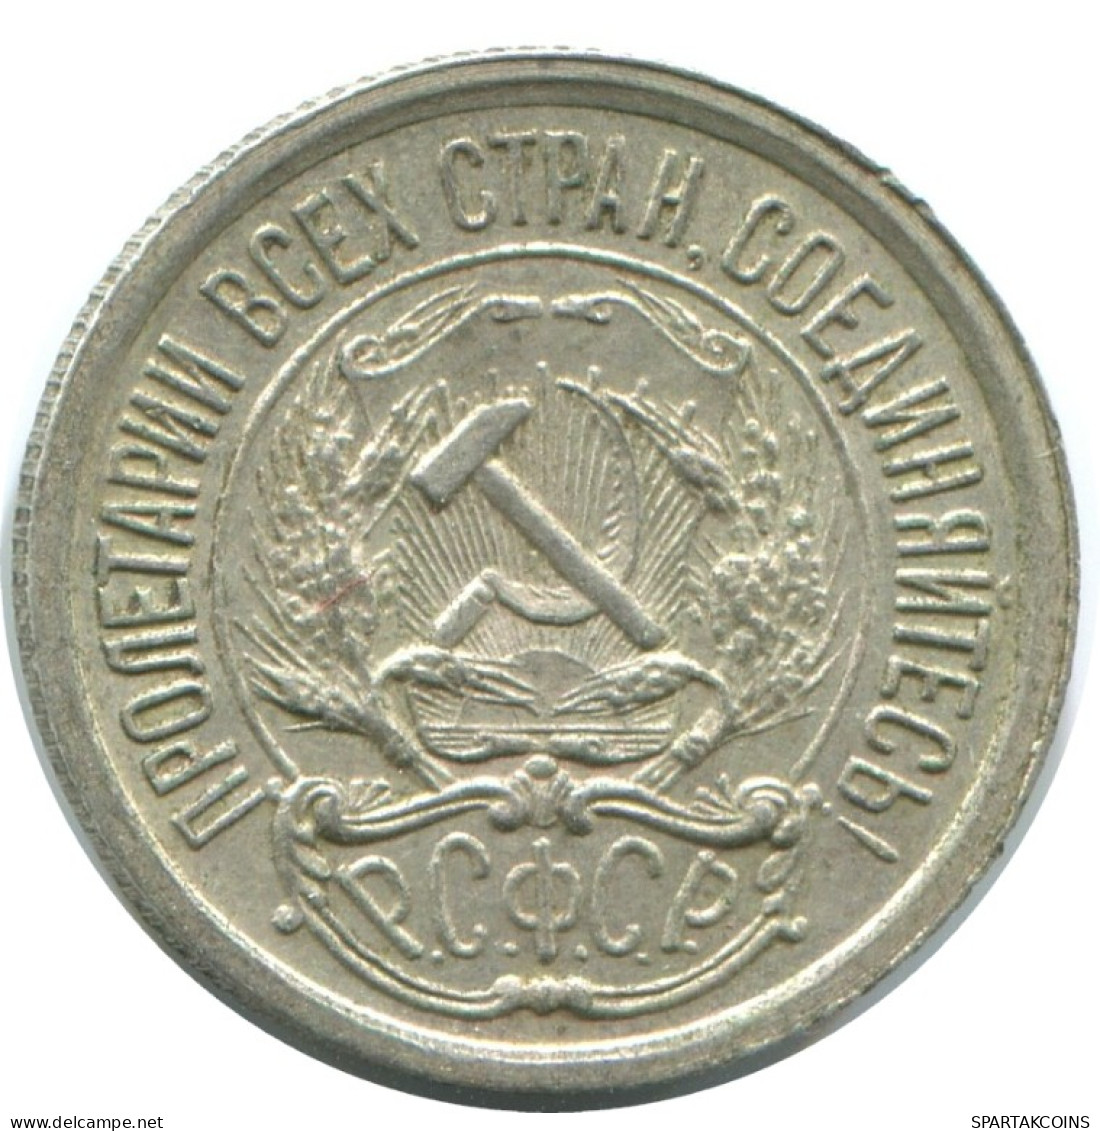 10 KOPEKS 1923 RUSSIE RUSSIA RSFSR ARGENT Pièce HIGH GRADE #AE917.4.F.A - Rusia